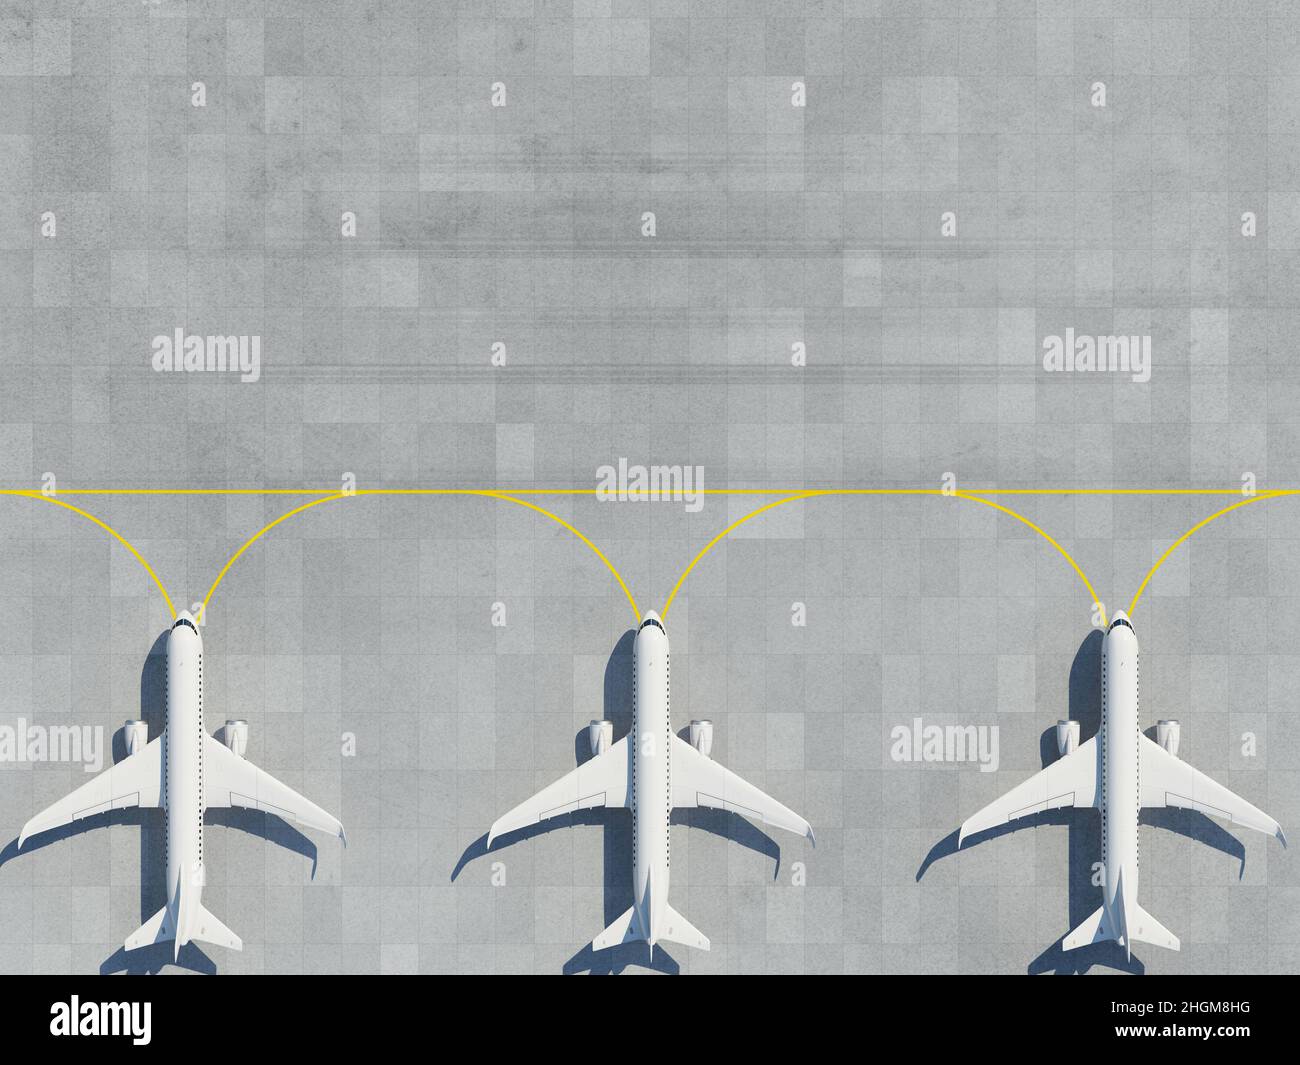 Aeroplanes parked on a concrete runway, illustration Stock Photo